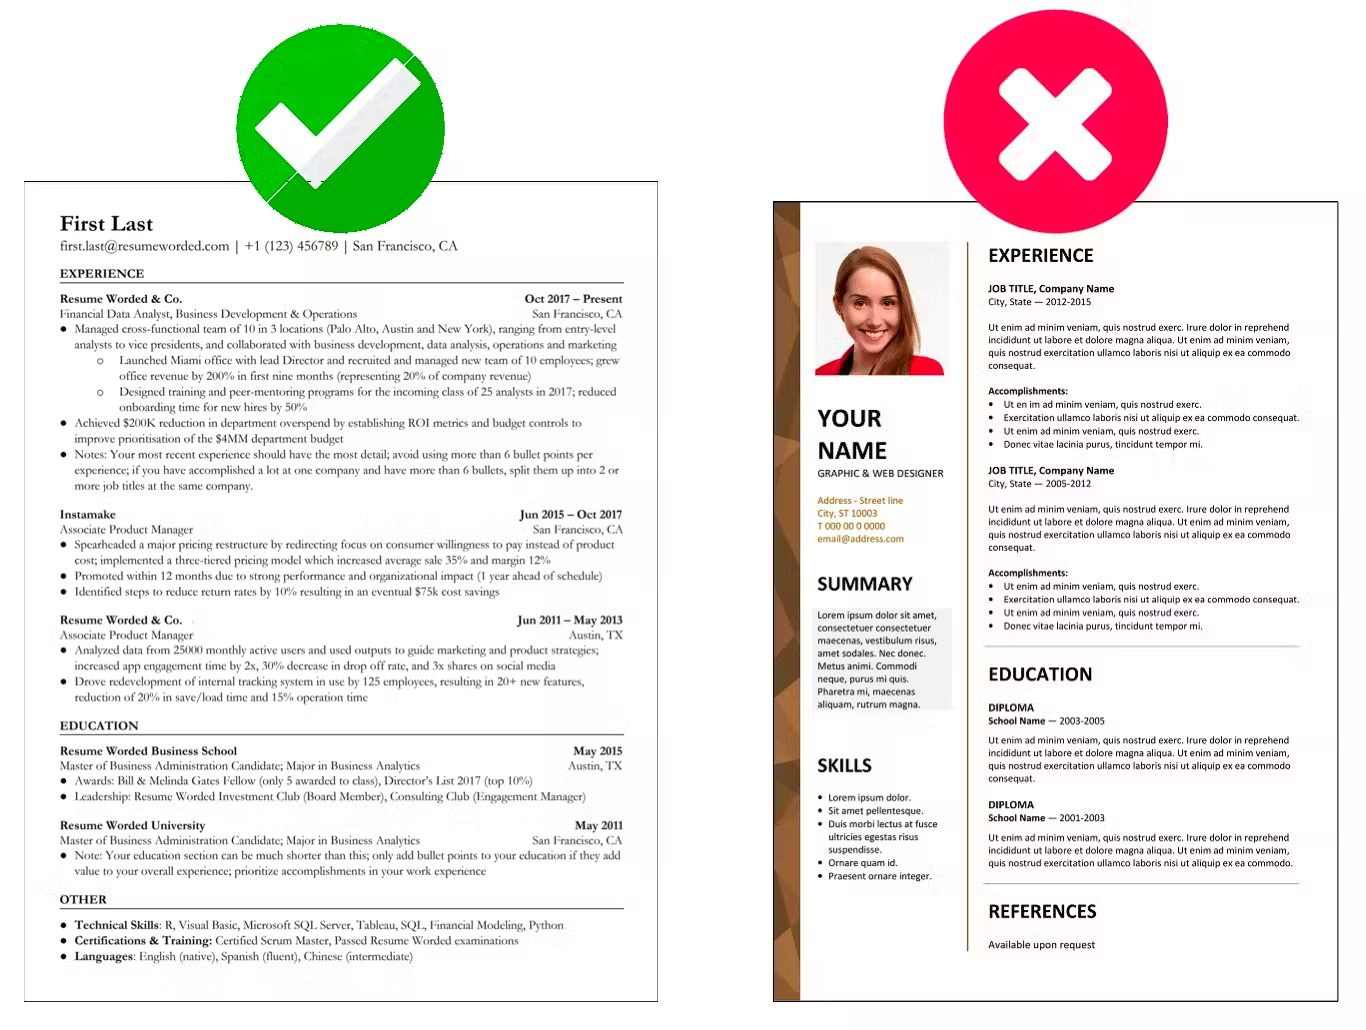 A bad resume example comparing traditional formatting to complex design layouts.